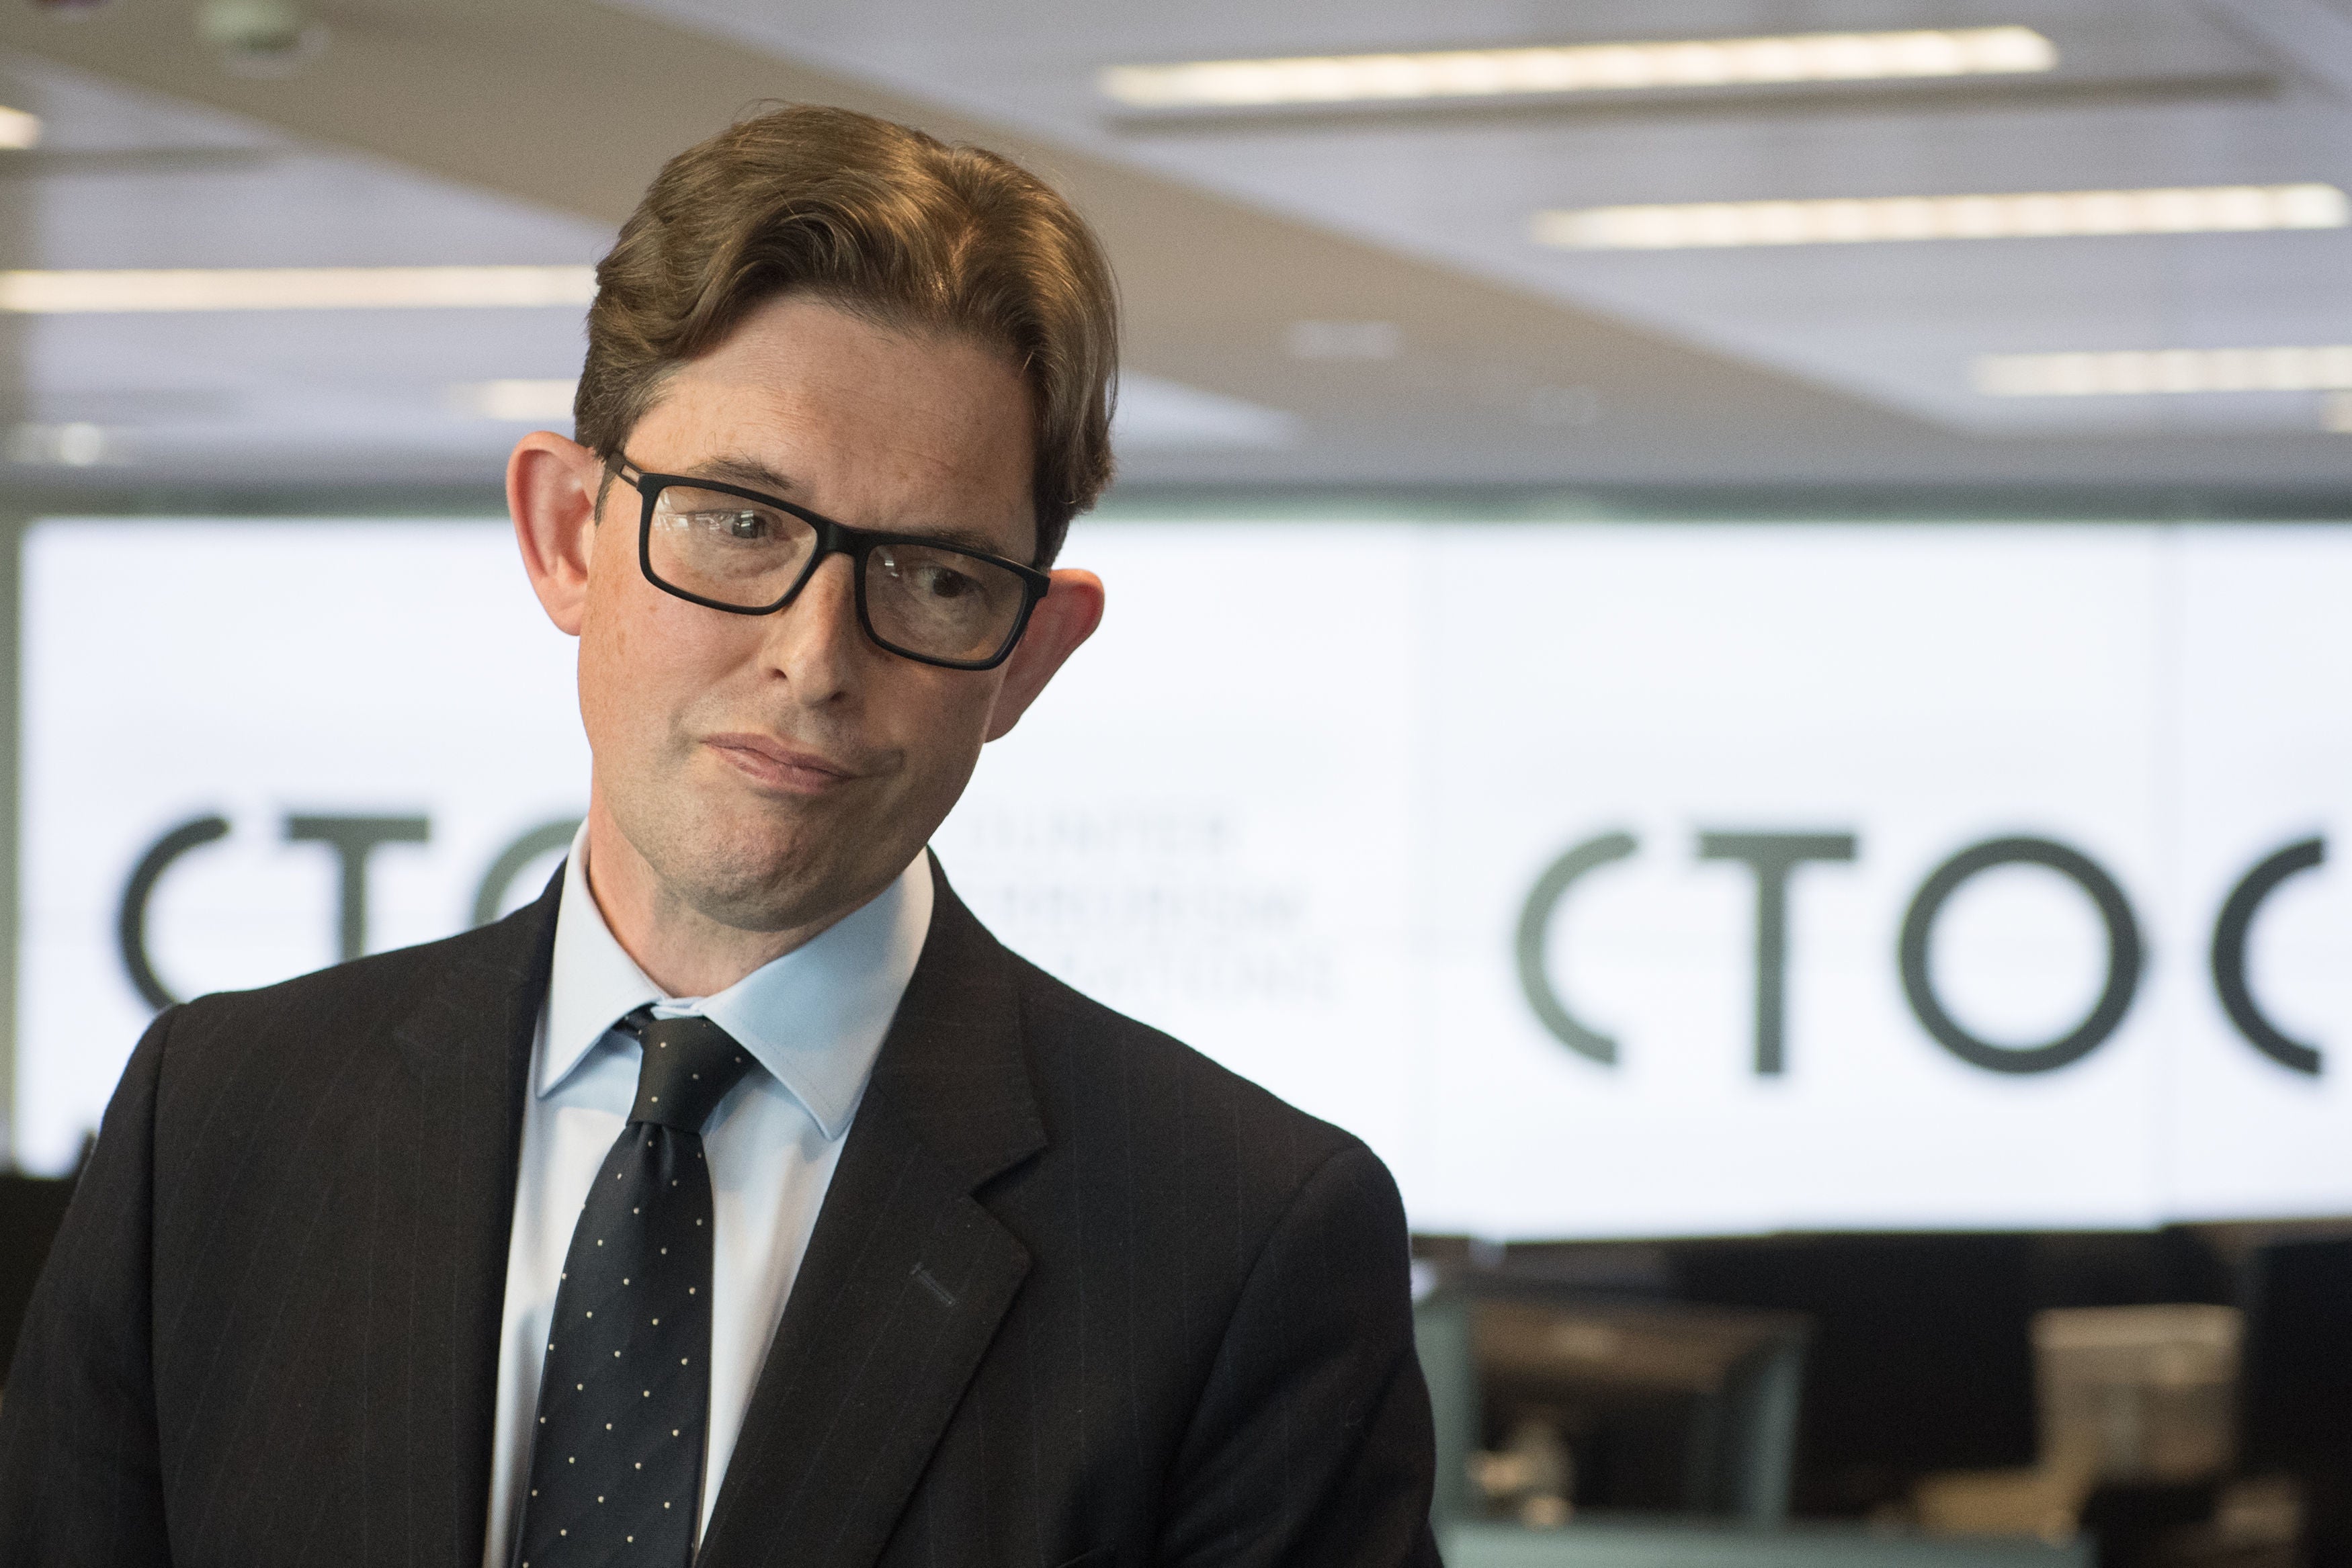 MI5 chief Ken McCallum pictured at the Counter-Terrorism Operations Centre (CTOC) in West Brompton, London in June.